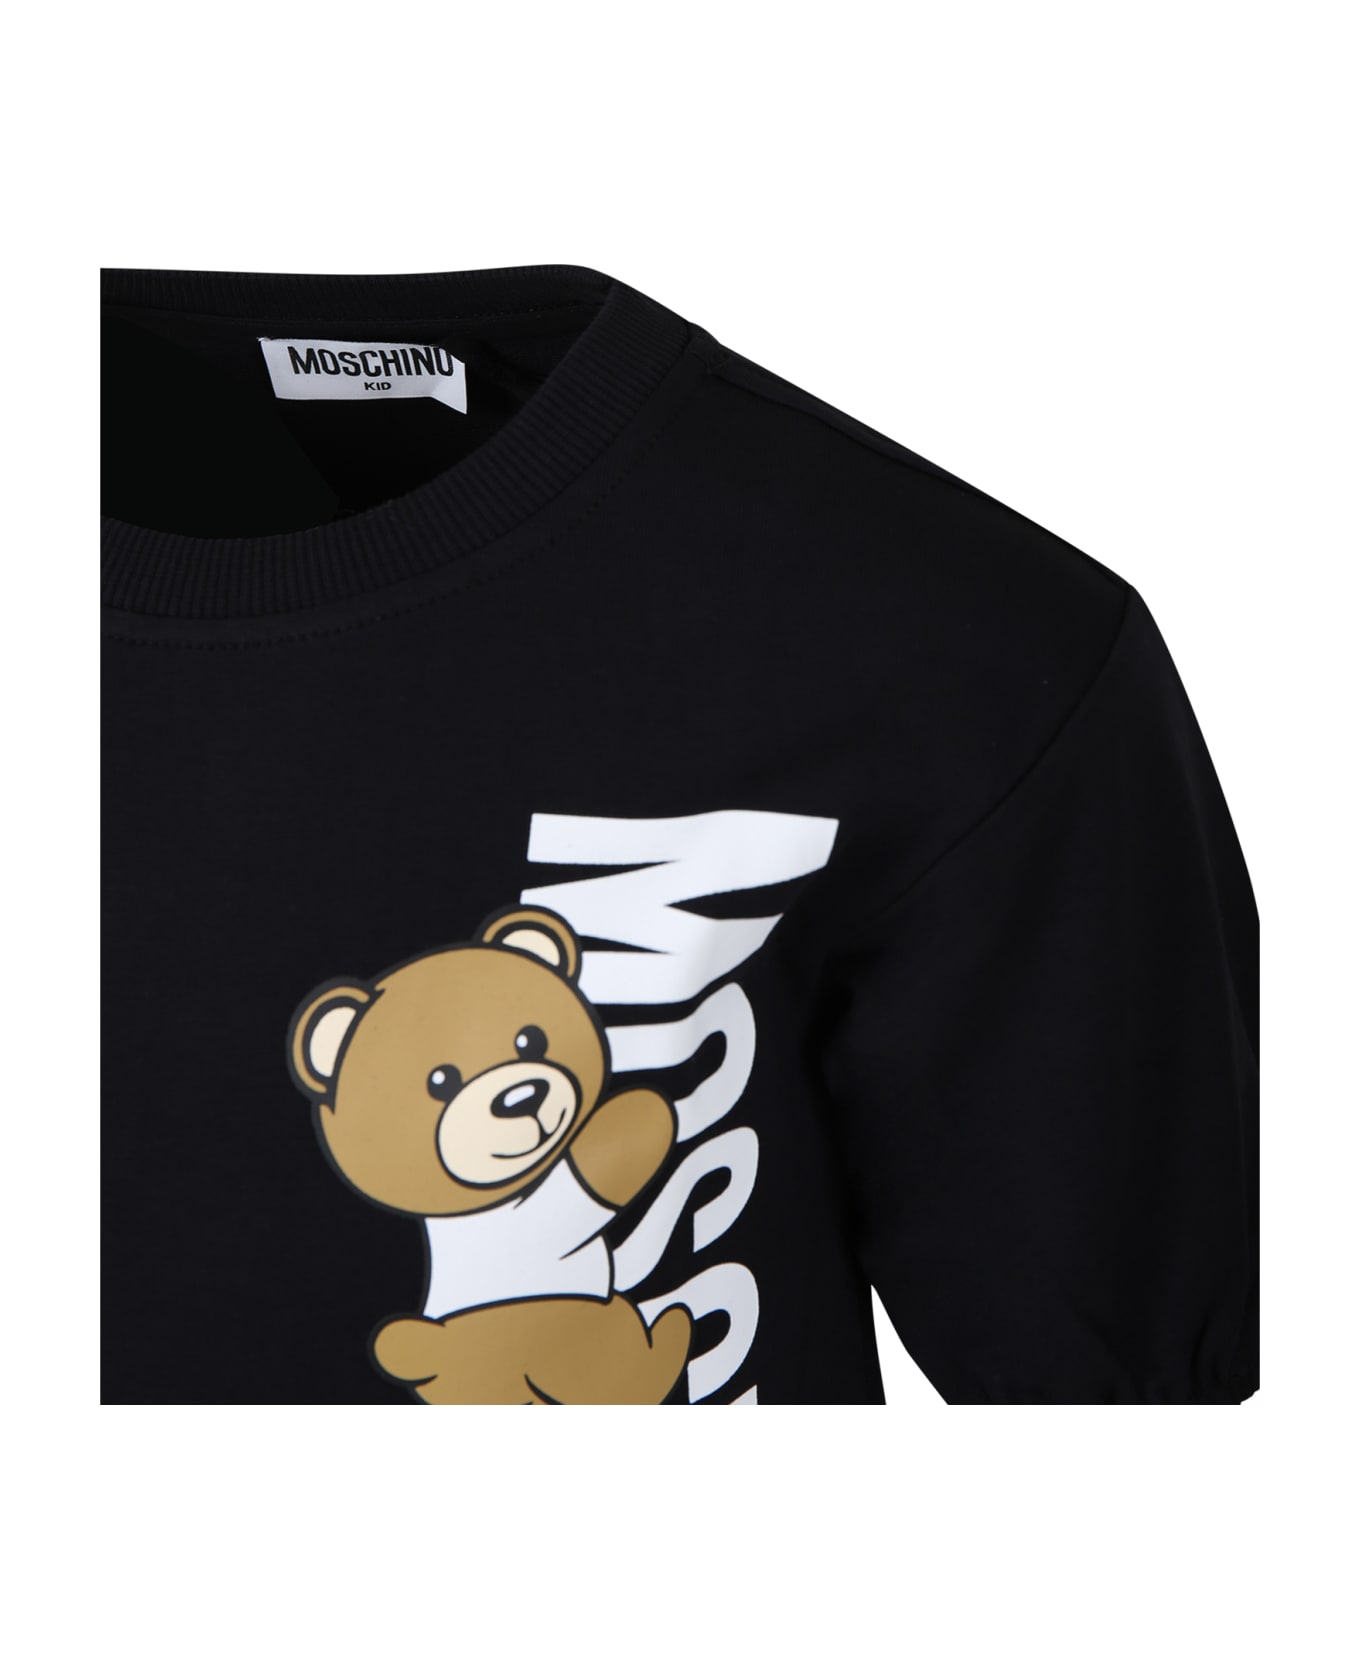 Moschino Black Dress For Girl With Teddy Bear And Logo - Black